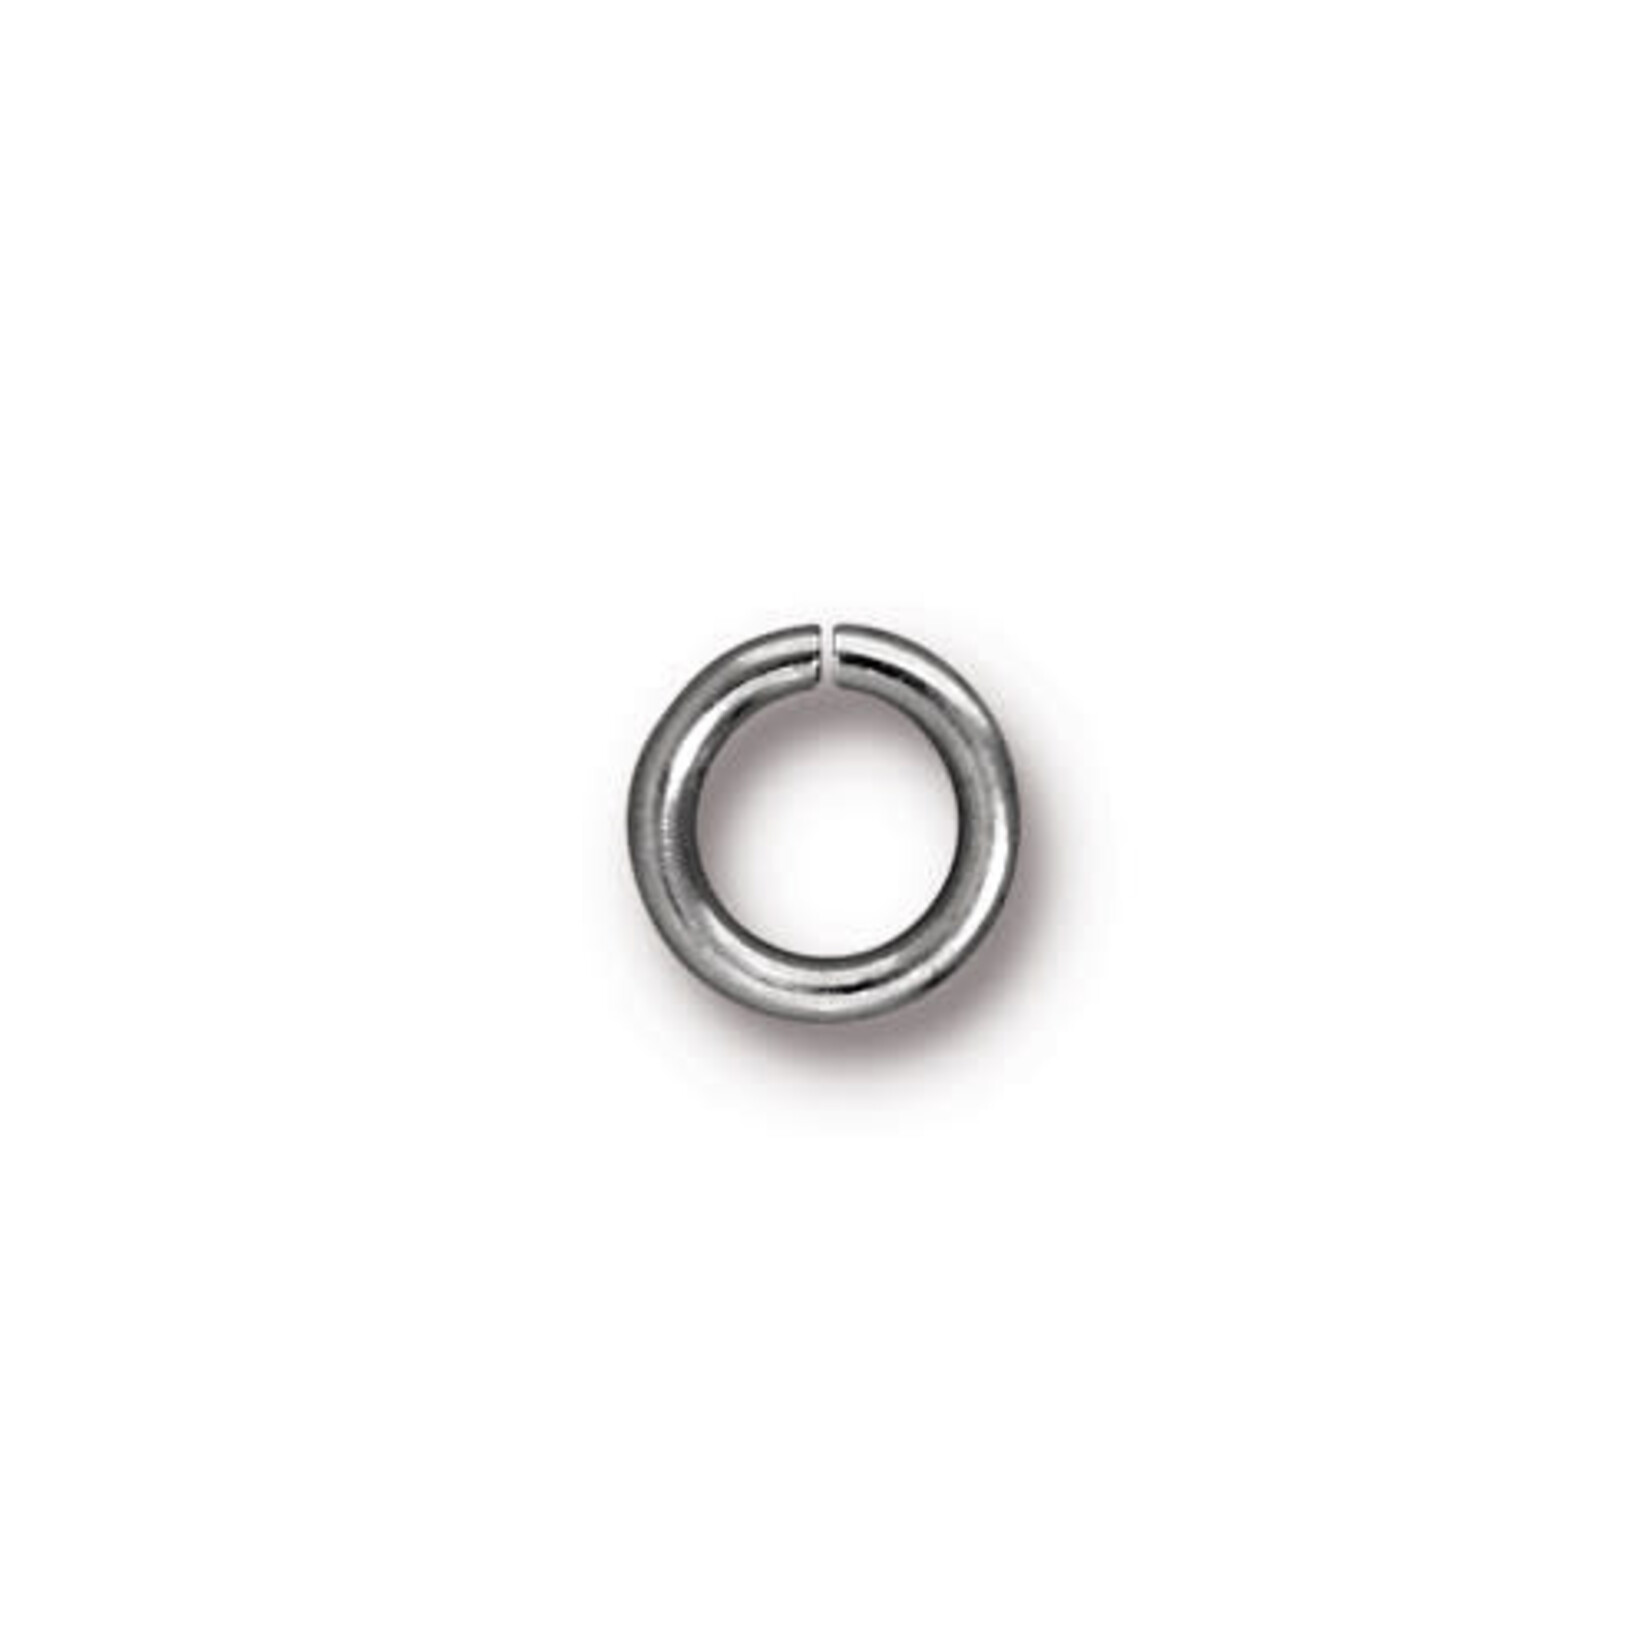 TierraCast Jump Ring 16 Ga Round, 5mm ID 8mm OD - White Bronze Plated - 100 pieces